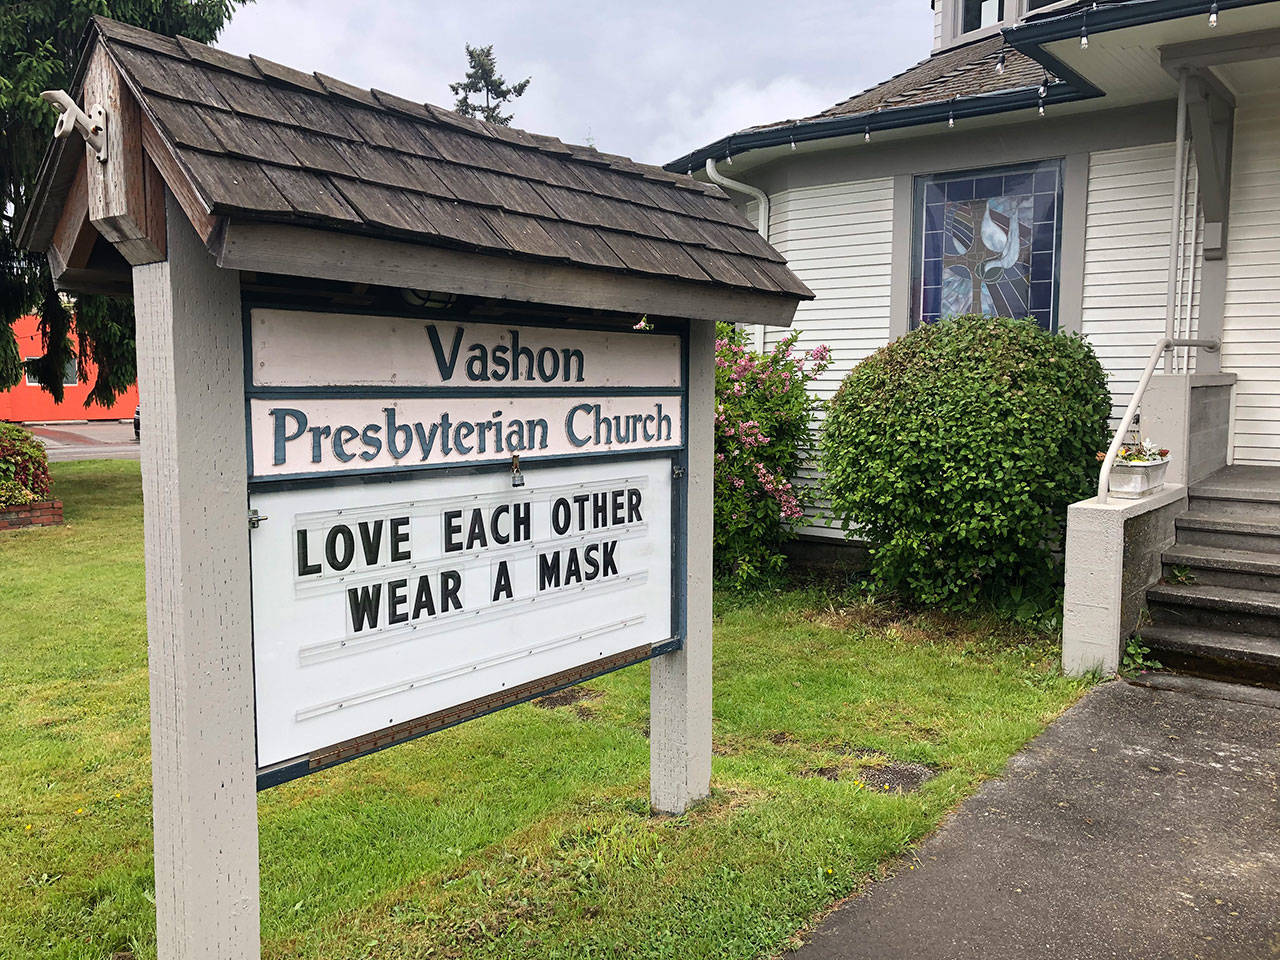 Vashon’s Presbyterian Church won’t be resuming in-person services anytime soon, said its pastor, Leigh Weber (Tom Hughes Photo).